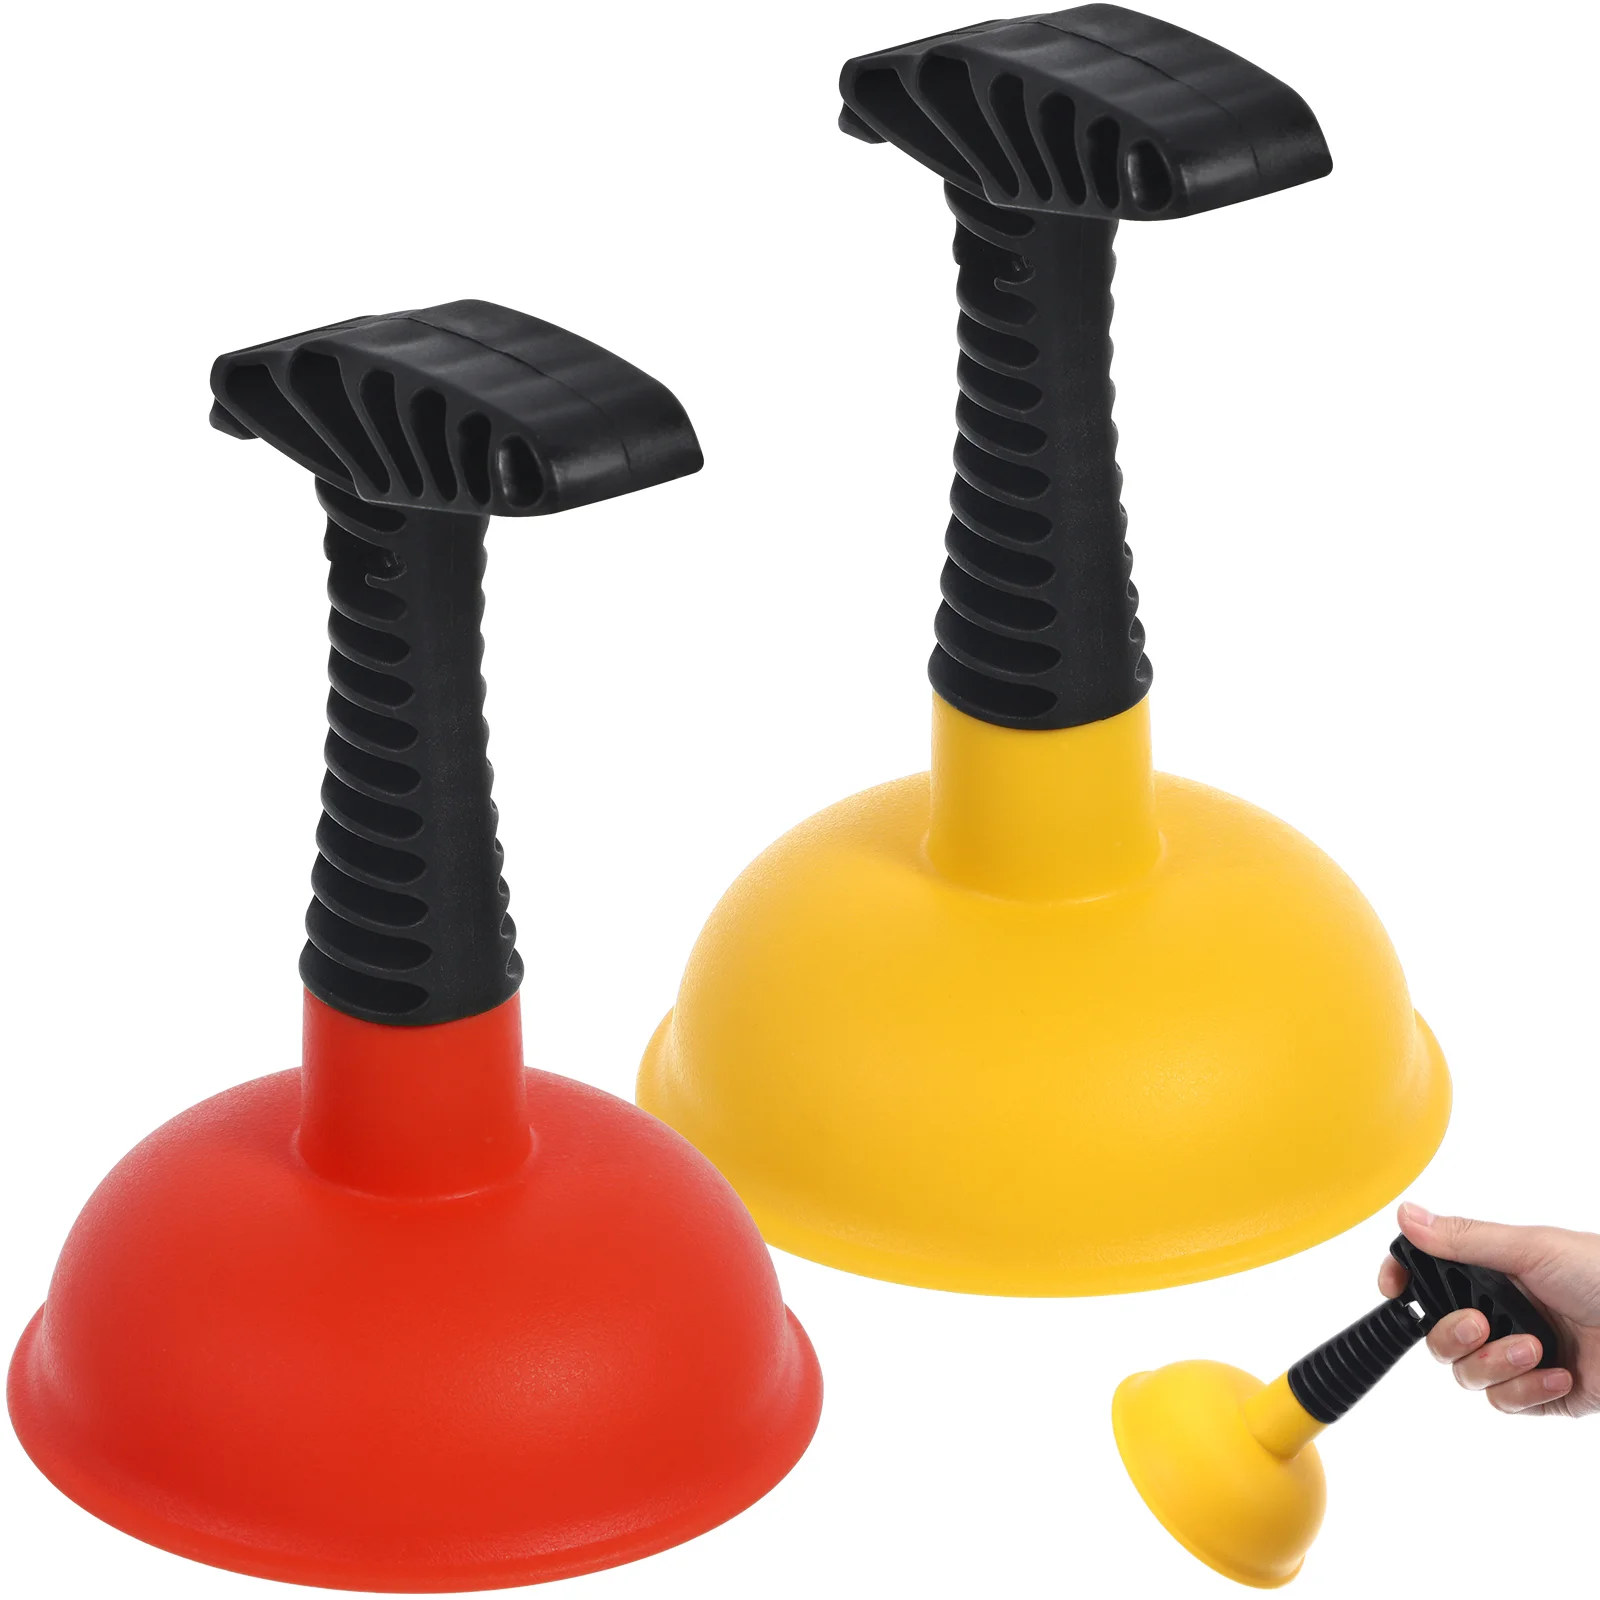 

Toilet Plungers Dormitory Unclog Plunger Reusable Bathroom Plungers Household Plungers for Bathroom Kitchen Gadgets